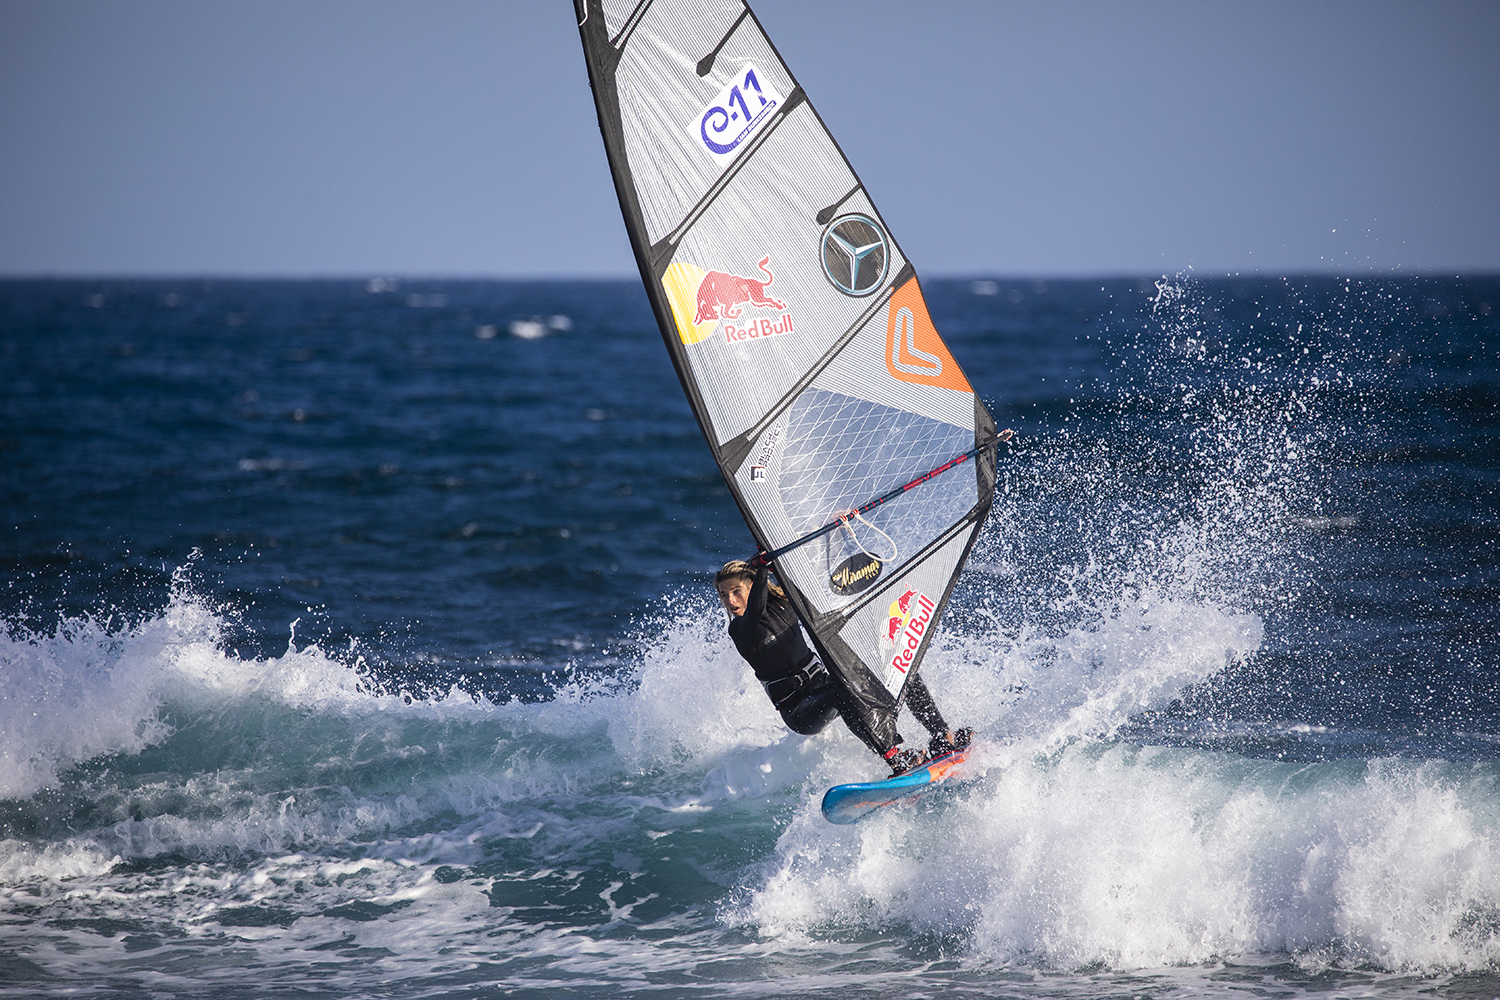 Liam Dunkerbeck in action. Photo : Gines Diaz/Red Bull Content Pool